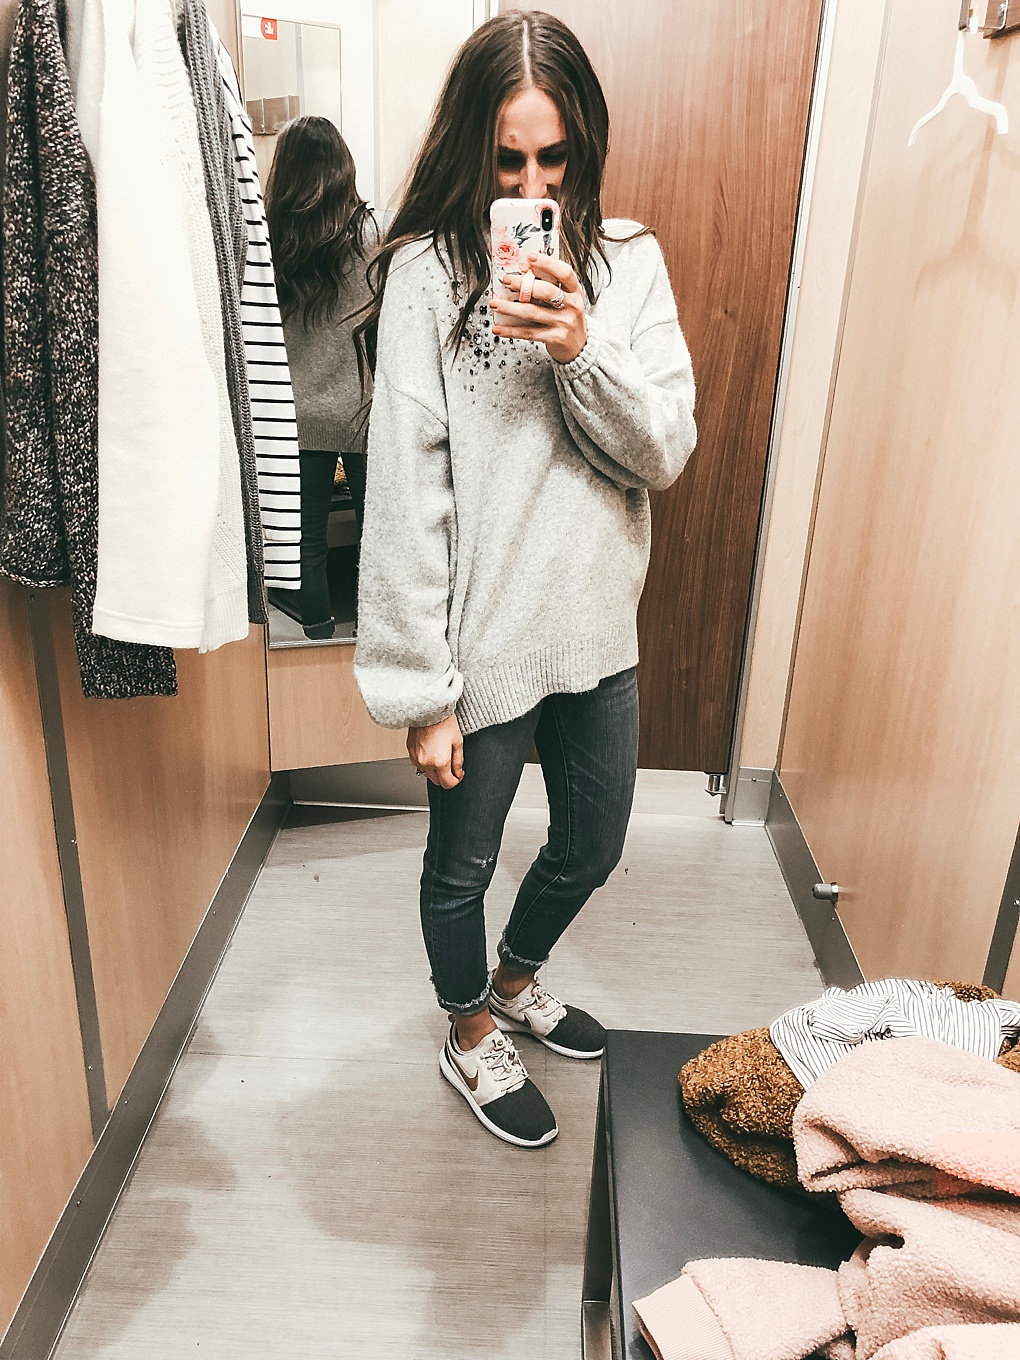 Headed to Target today? Utah Style Blogger Dani Marie is sharing her latest fashion finds in her Target try on. See her picks here!